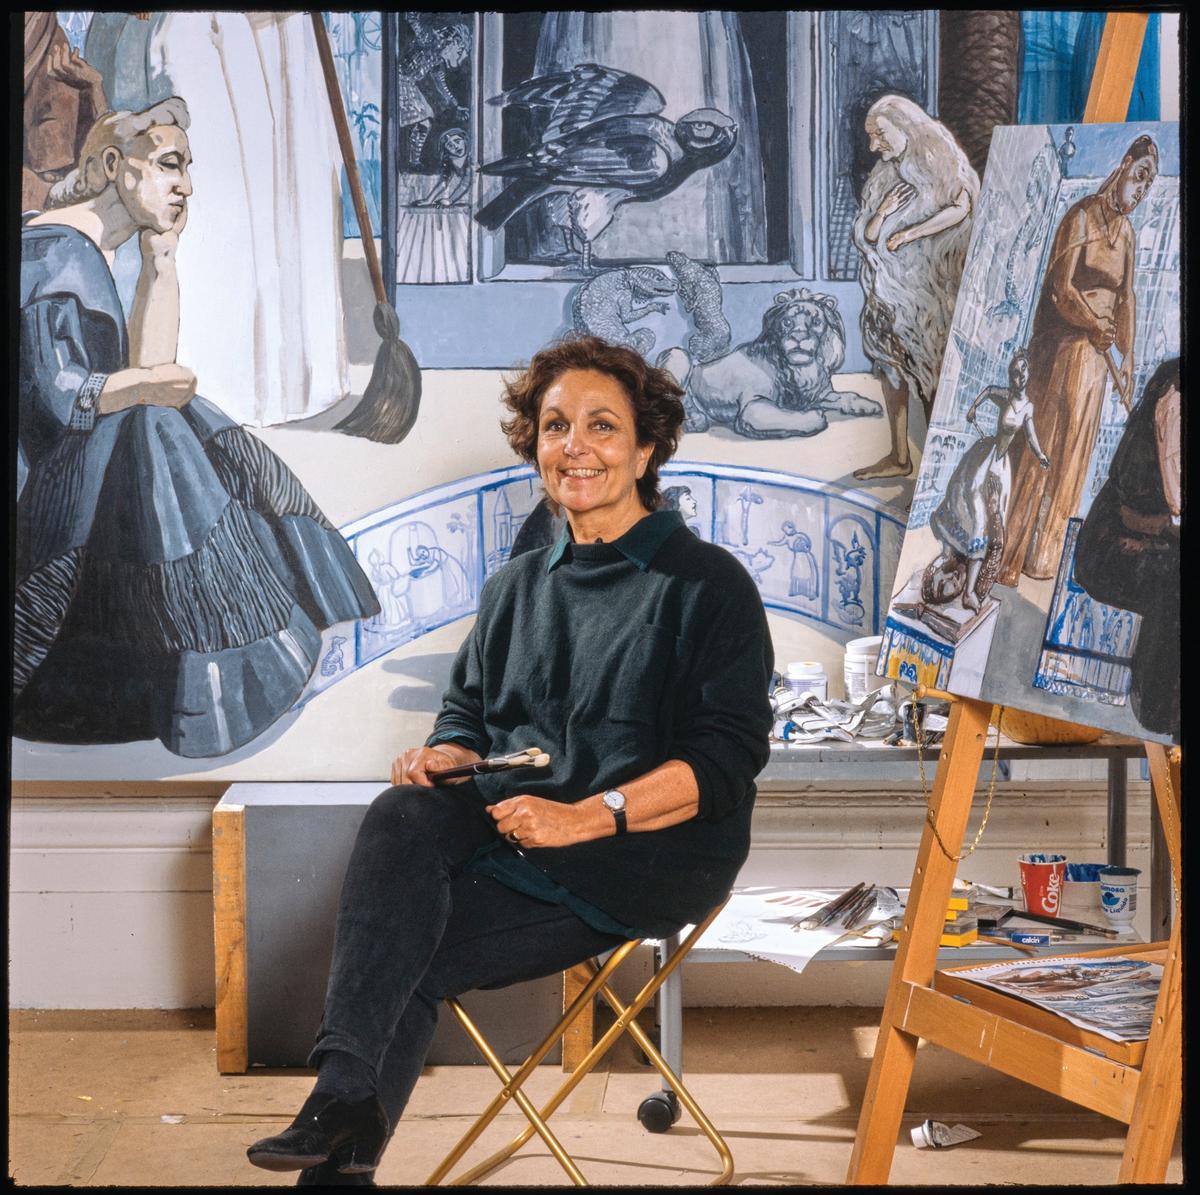 Paula Rego in her studio in 1990 with Crivelli's Garden Photo: The National Gallery, London, © Ostrich Arts